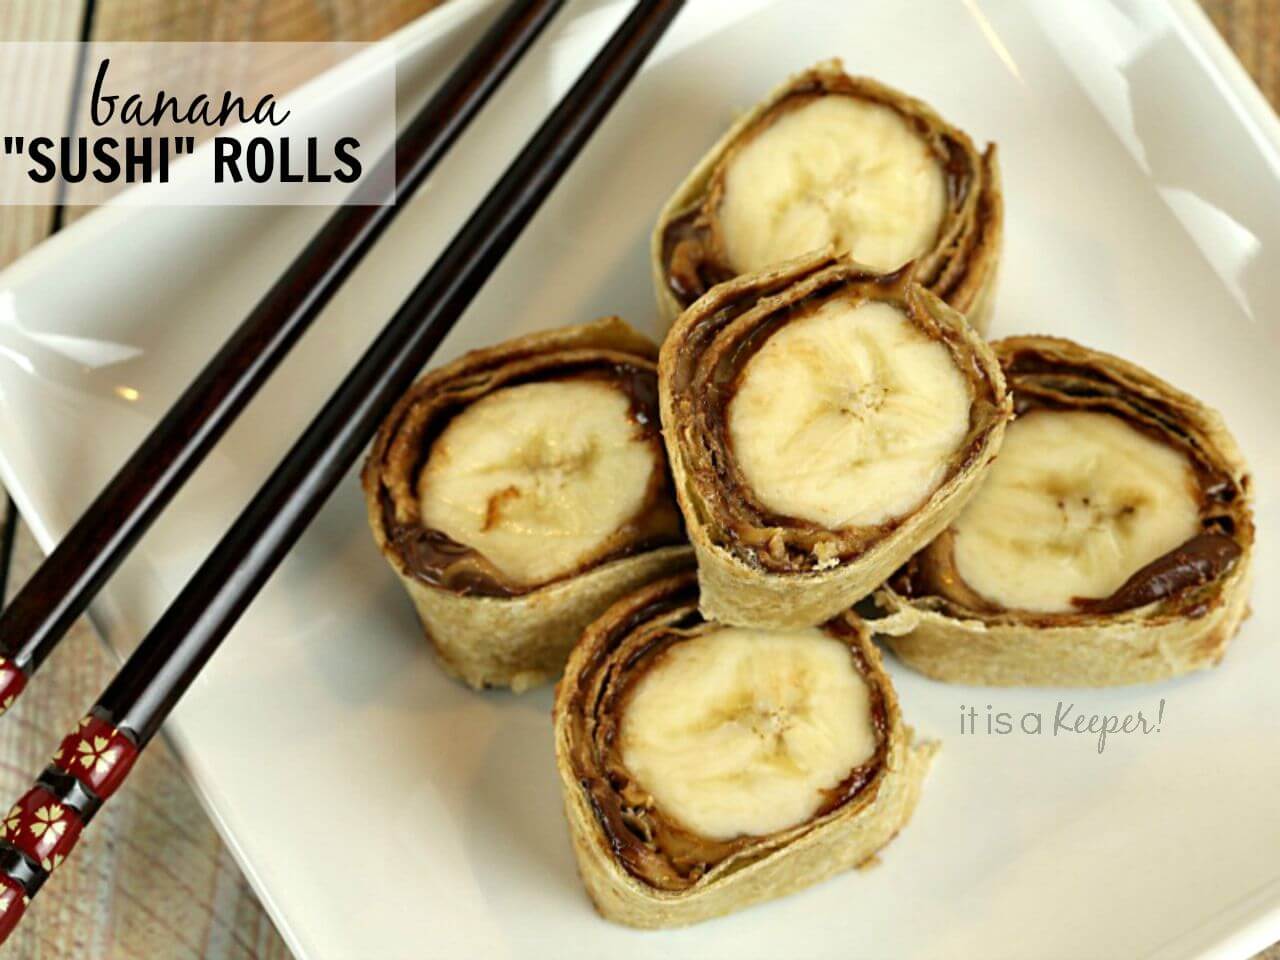 Banana Sushi Rolls on a white plate accompanied by black chop sticks for eating